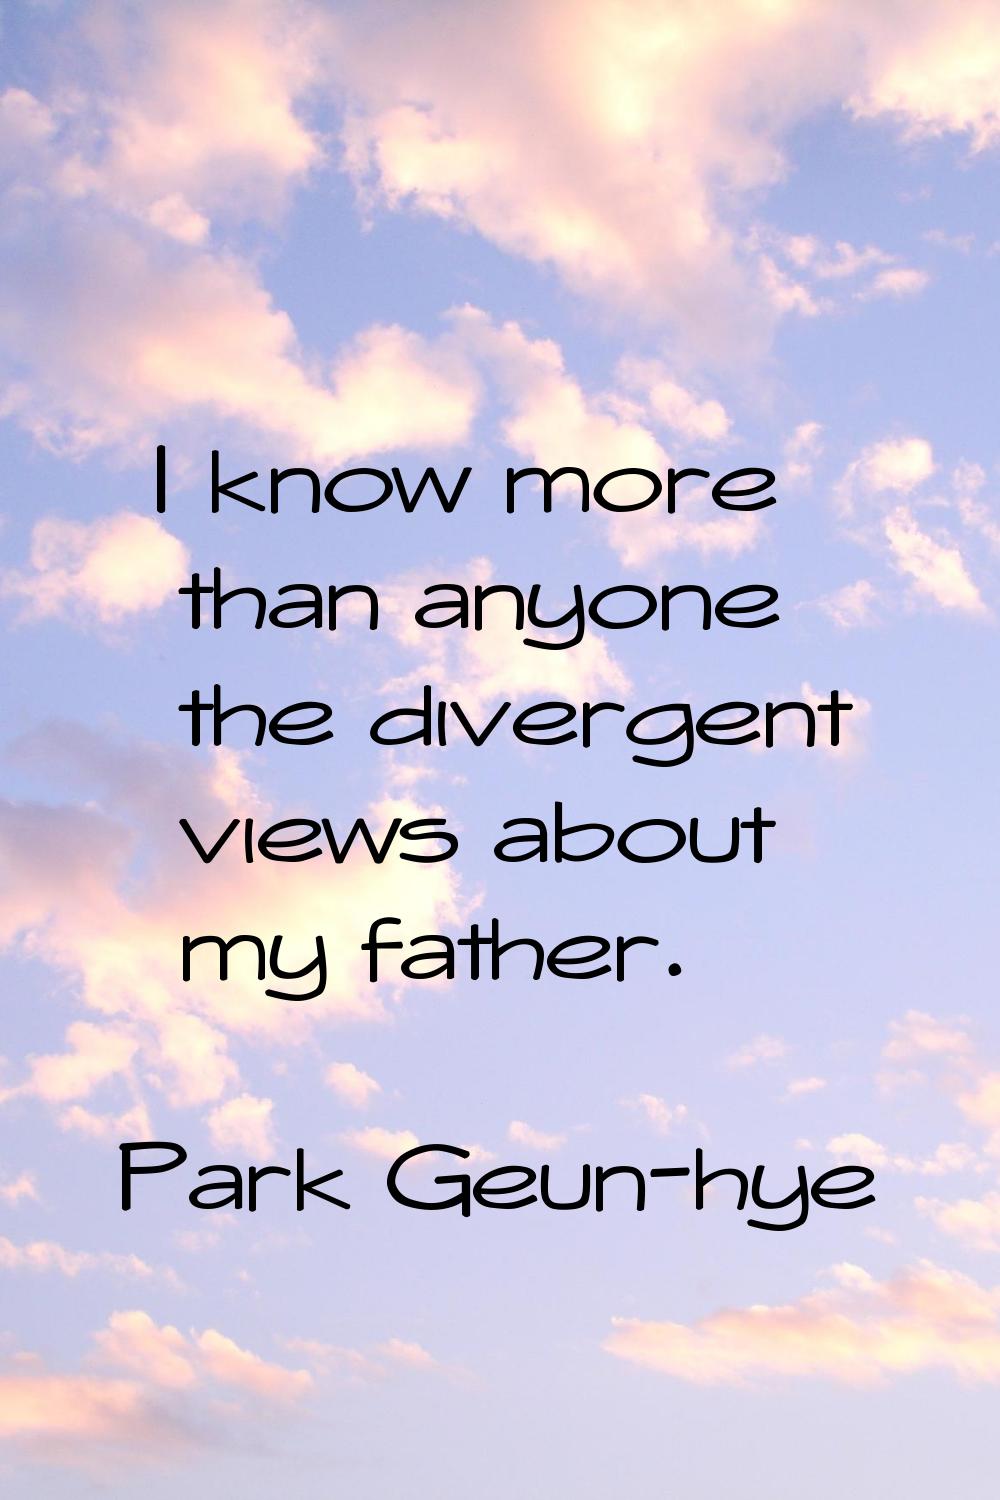 I know more than anyone the divergent views about my father.